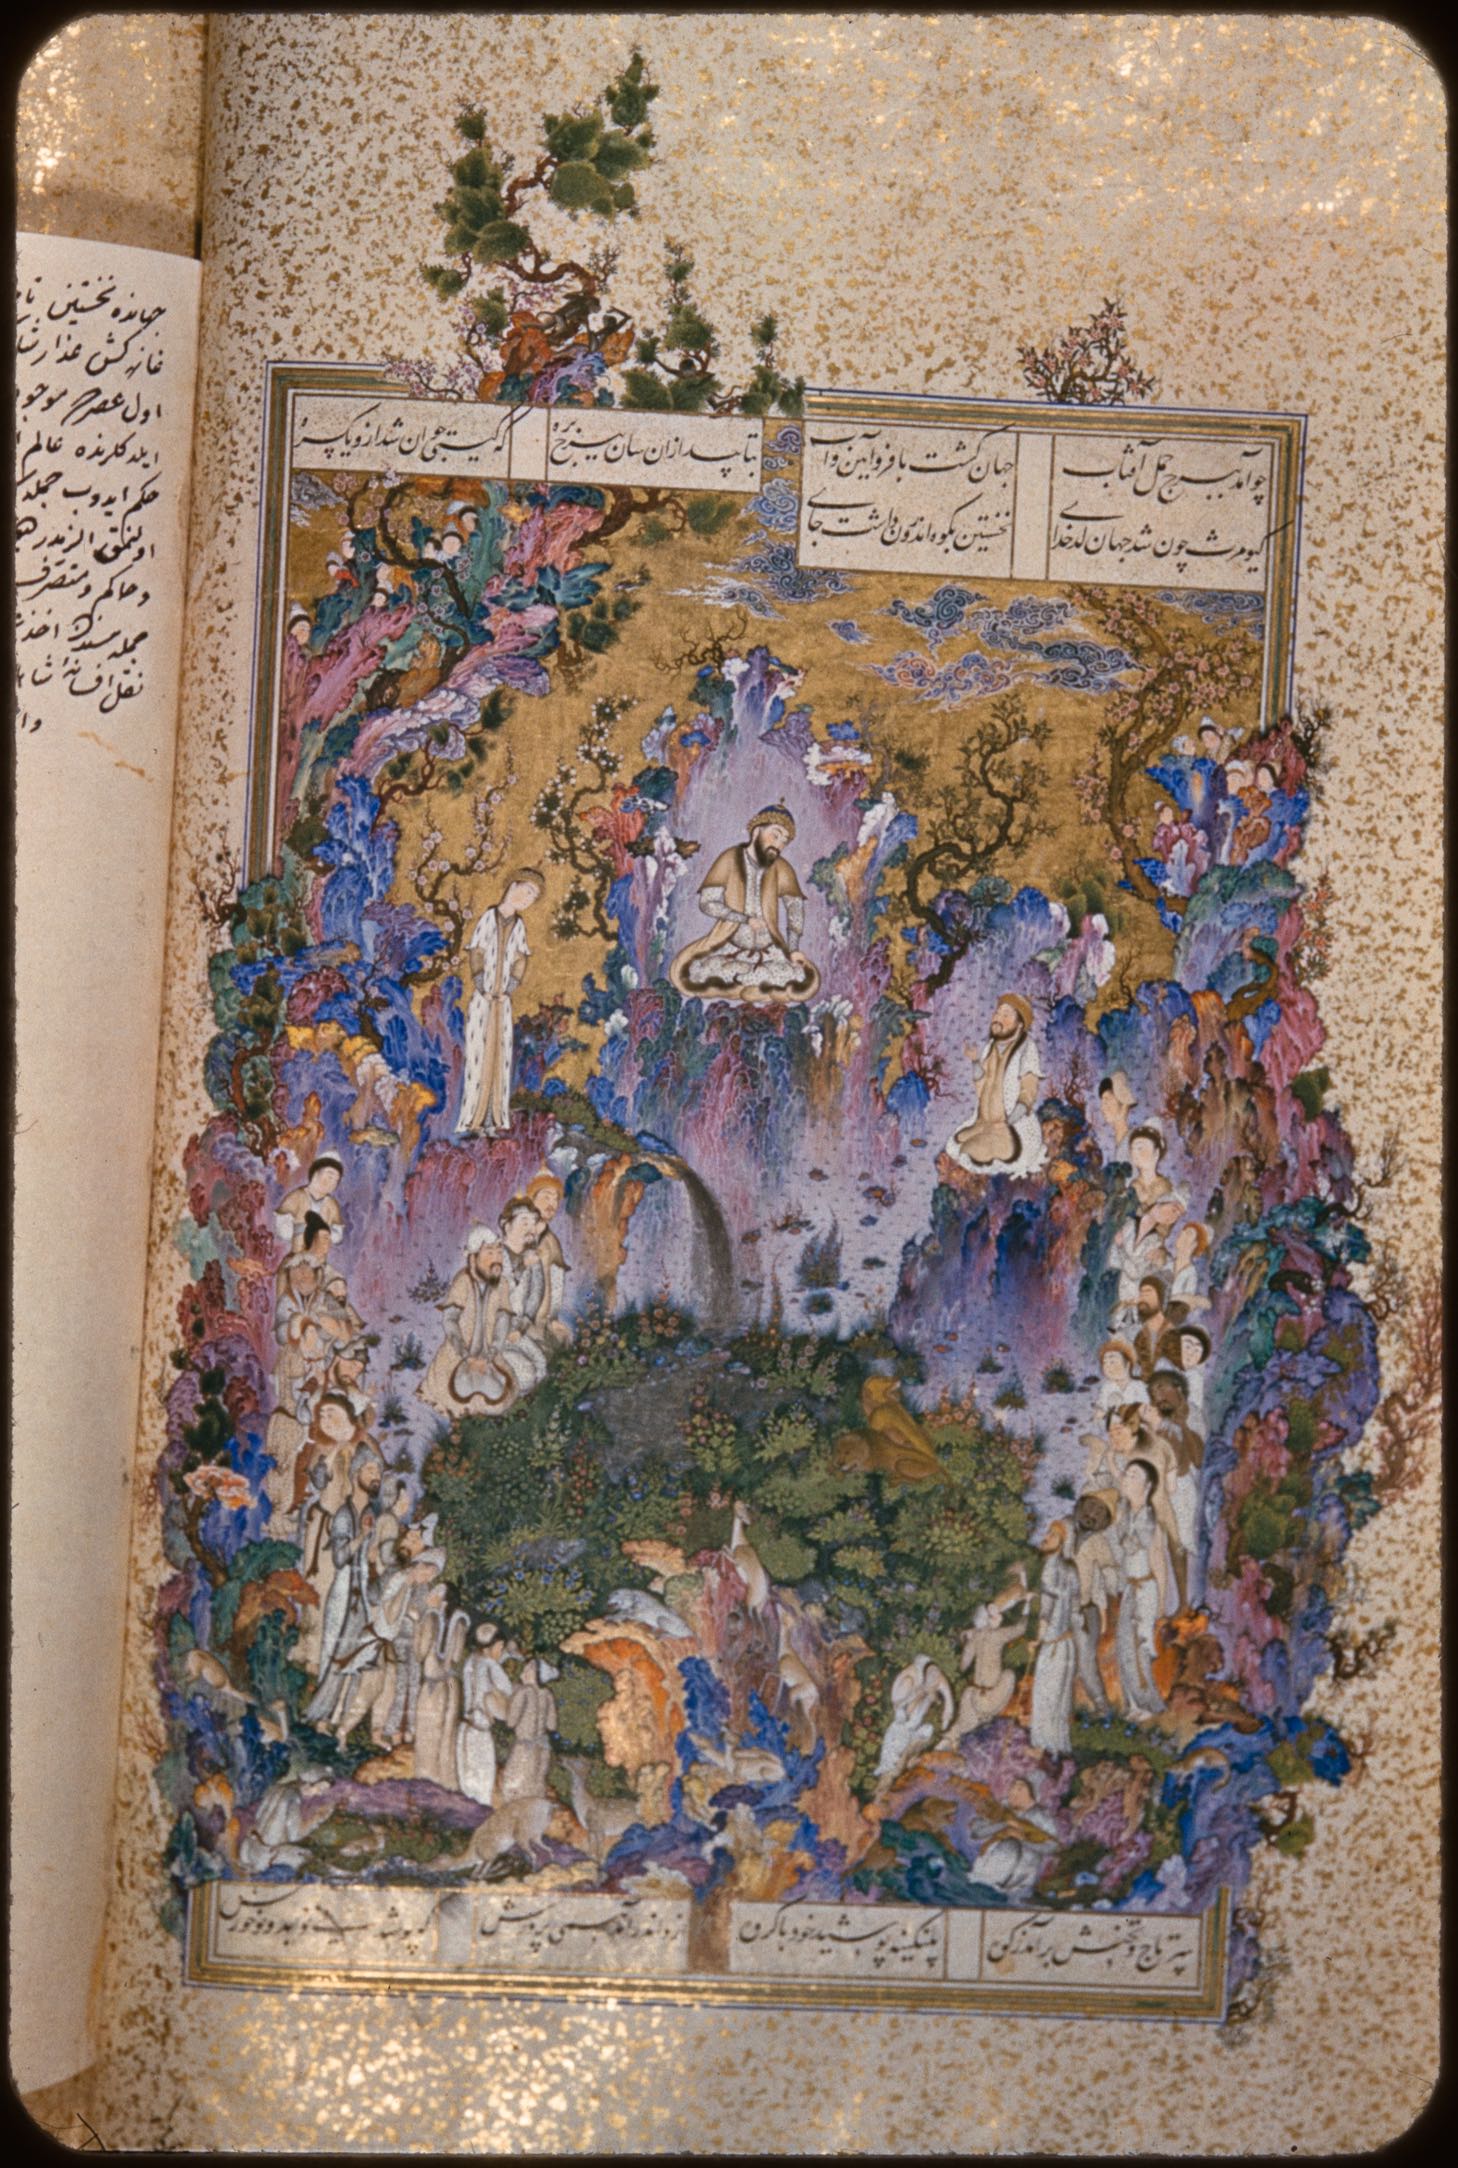 The Court of Gayumars (AKM 00165), f. 20v from the Houghton Shahnama, shown in situ